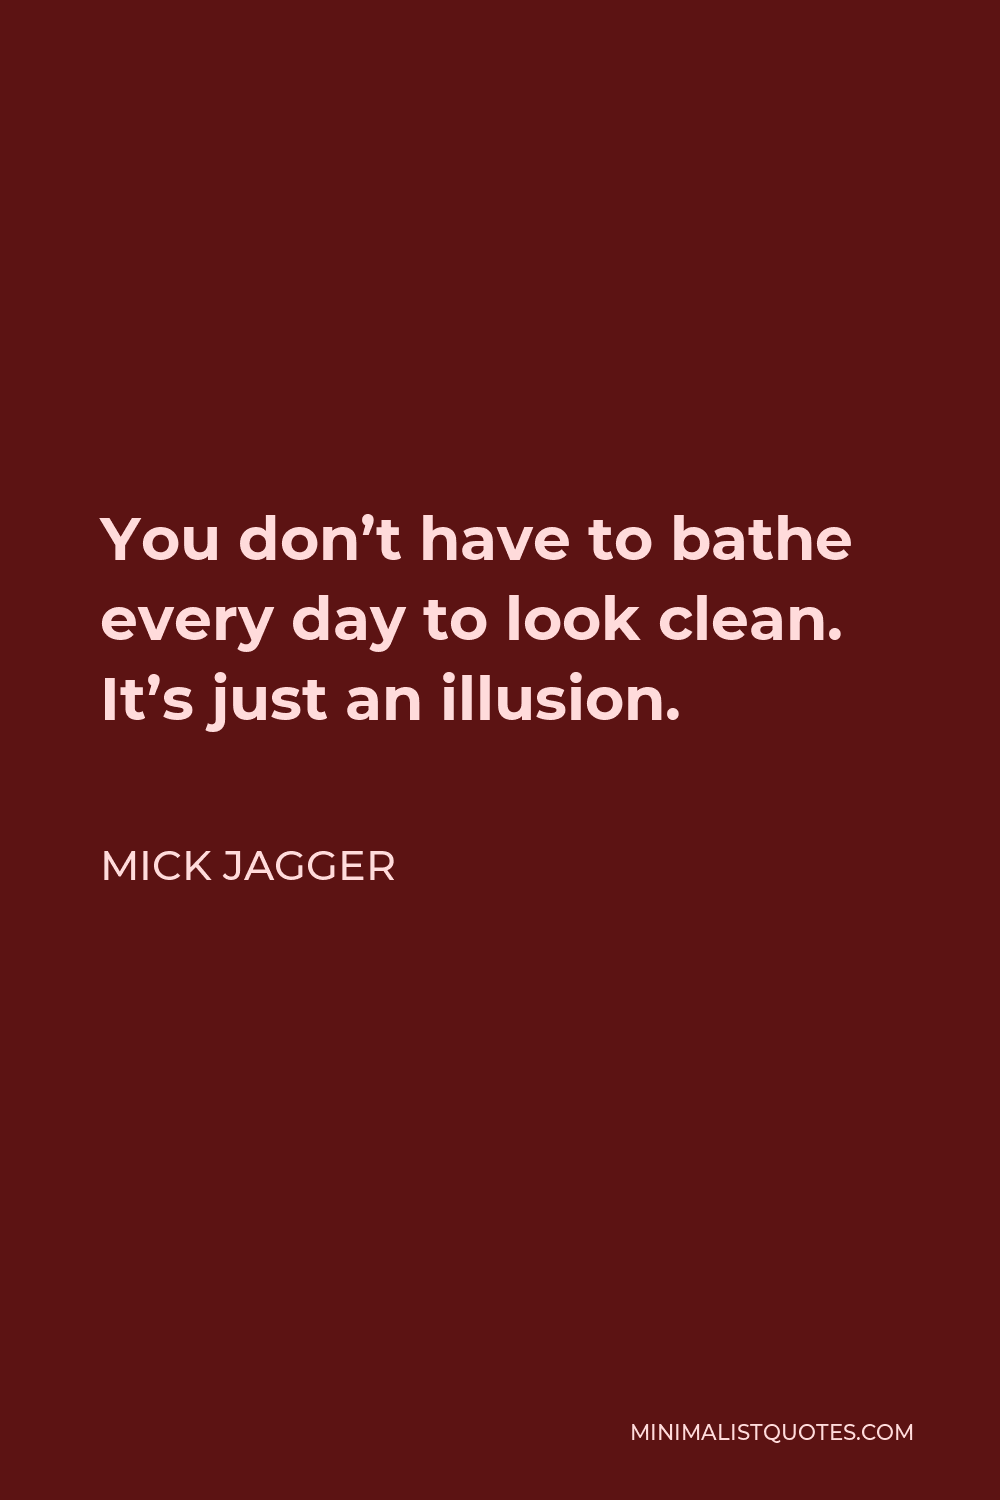 Mick Jagger Quote - You don’t have to bathe every day to look clean. It’s just an illusion.